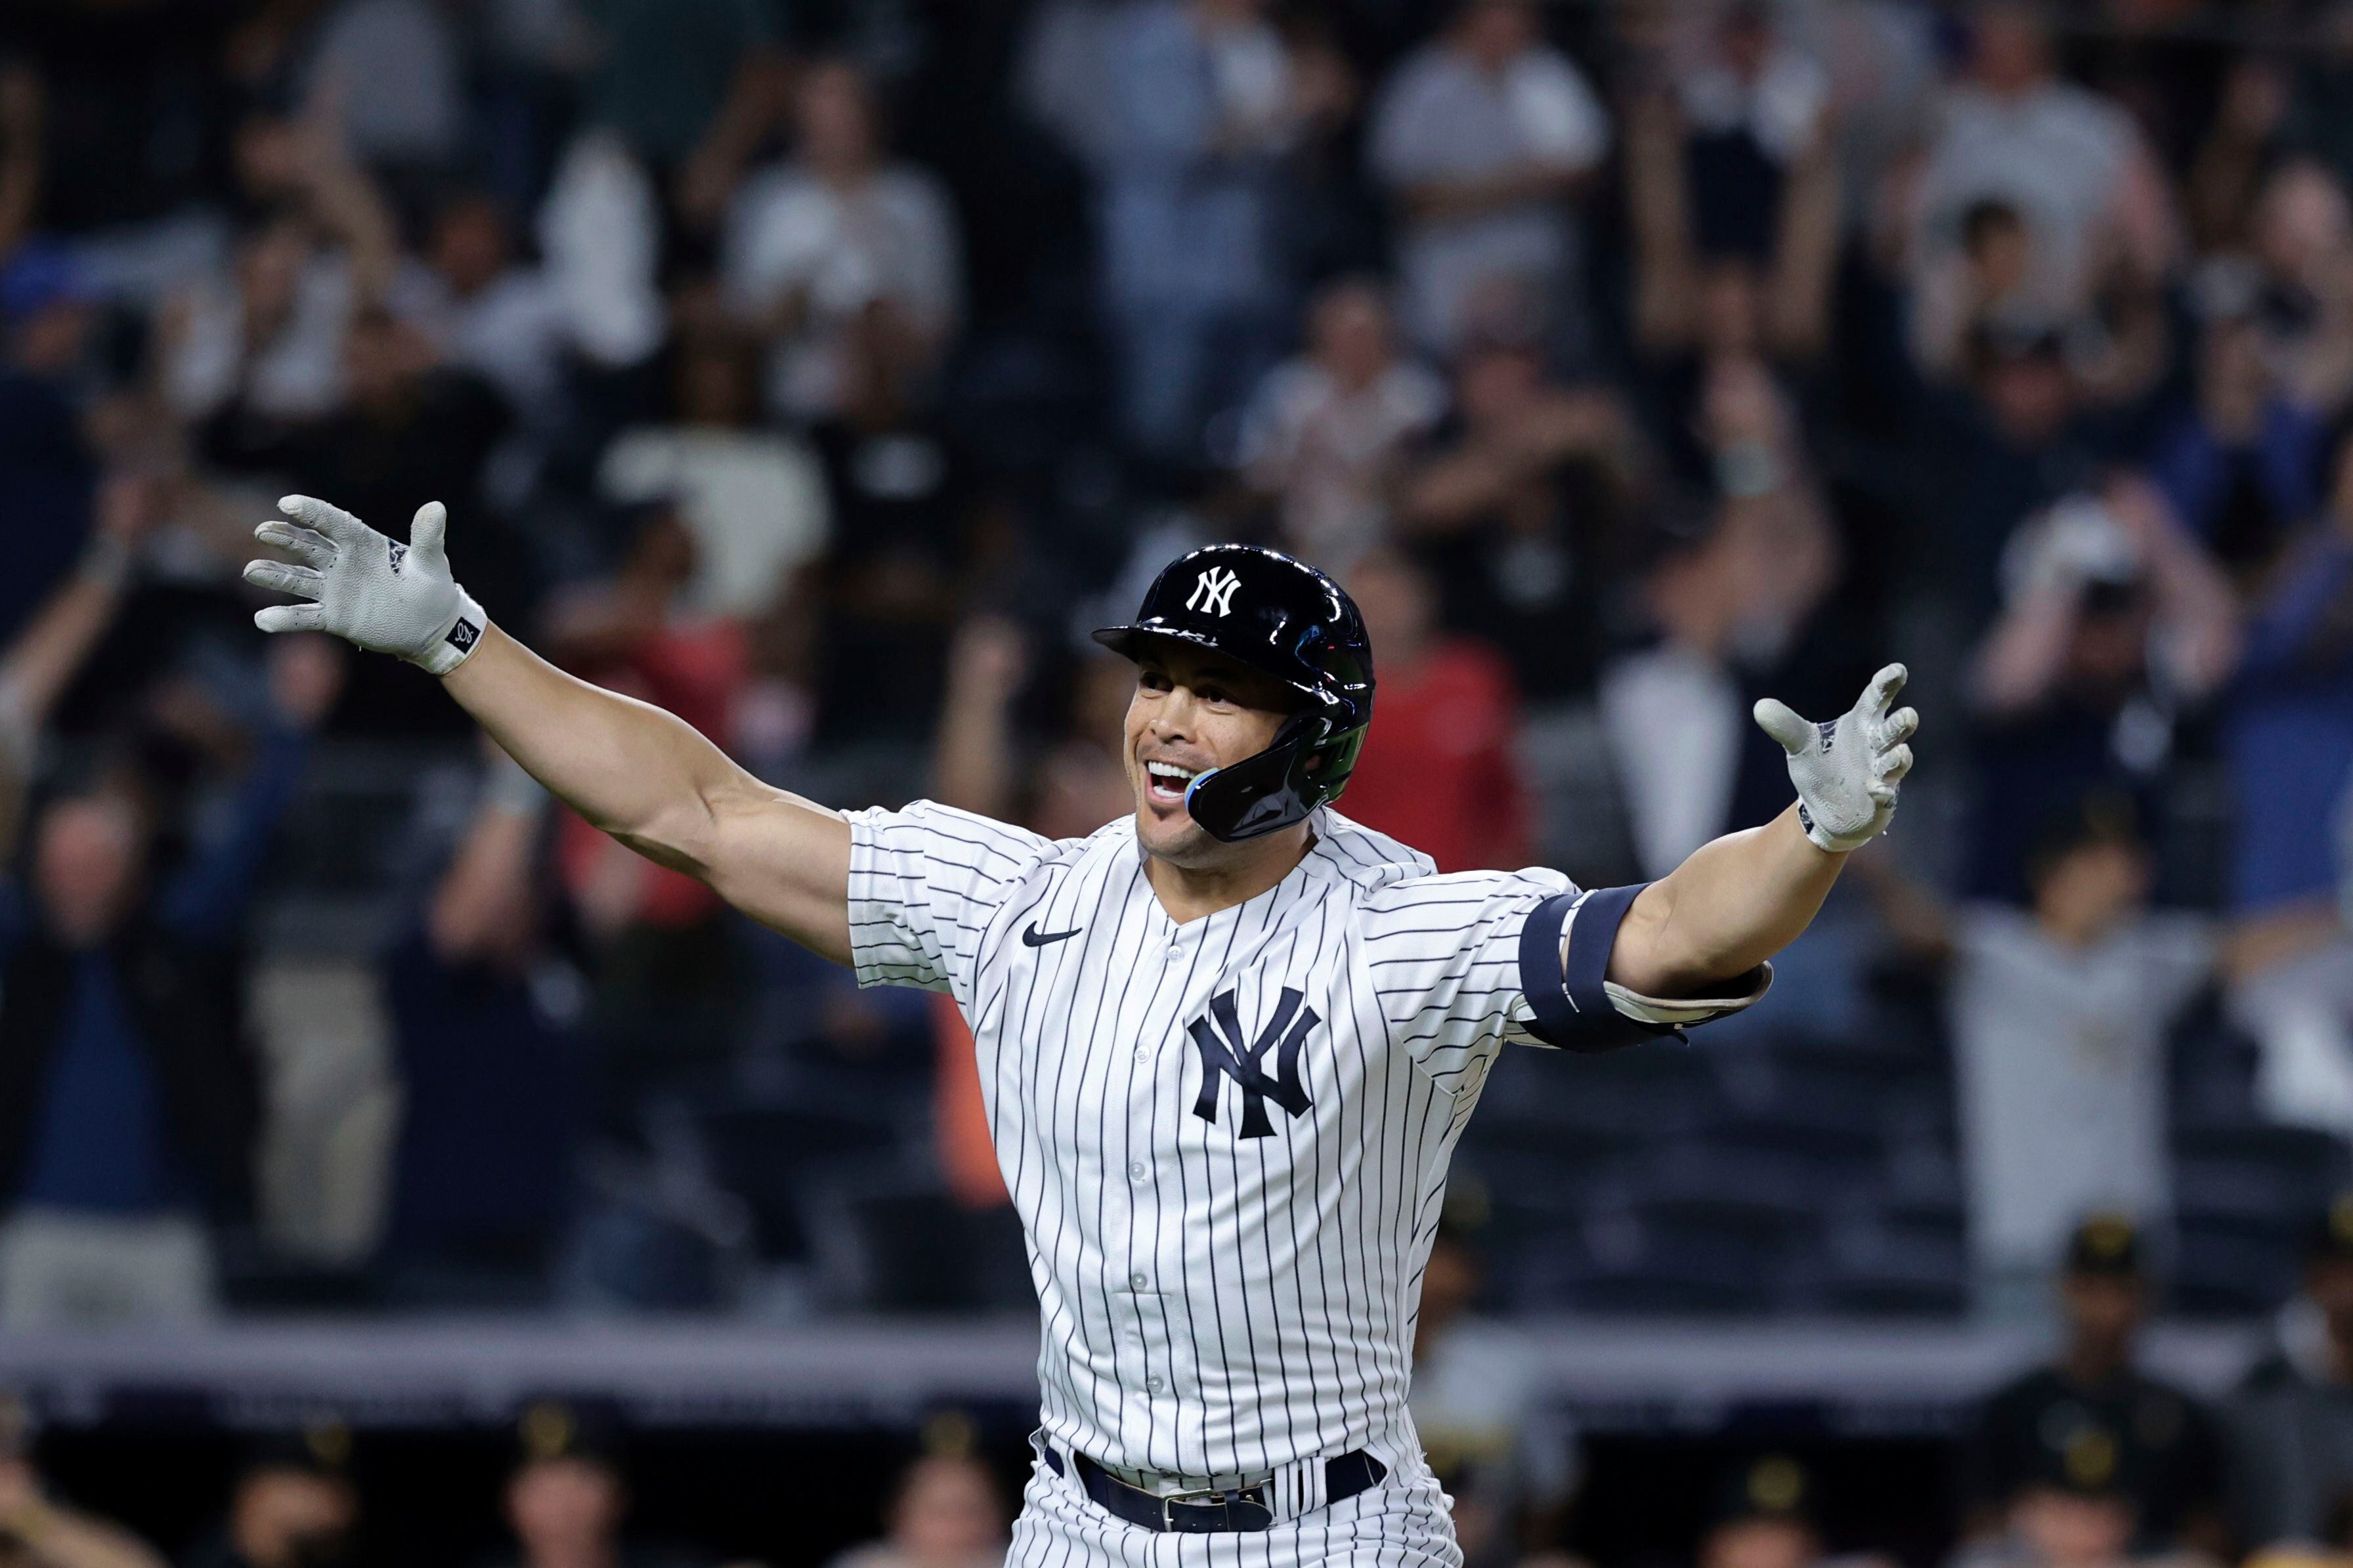 Pirates blow 4-run lead in 9th, concede Aaron Judge's 60th home run in walk- off loss to Yankees